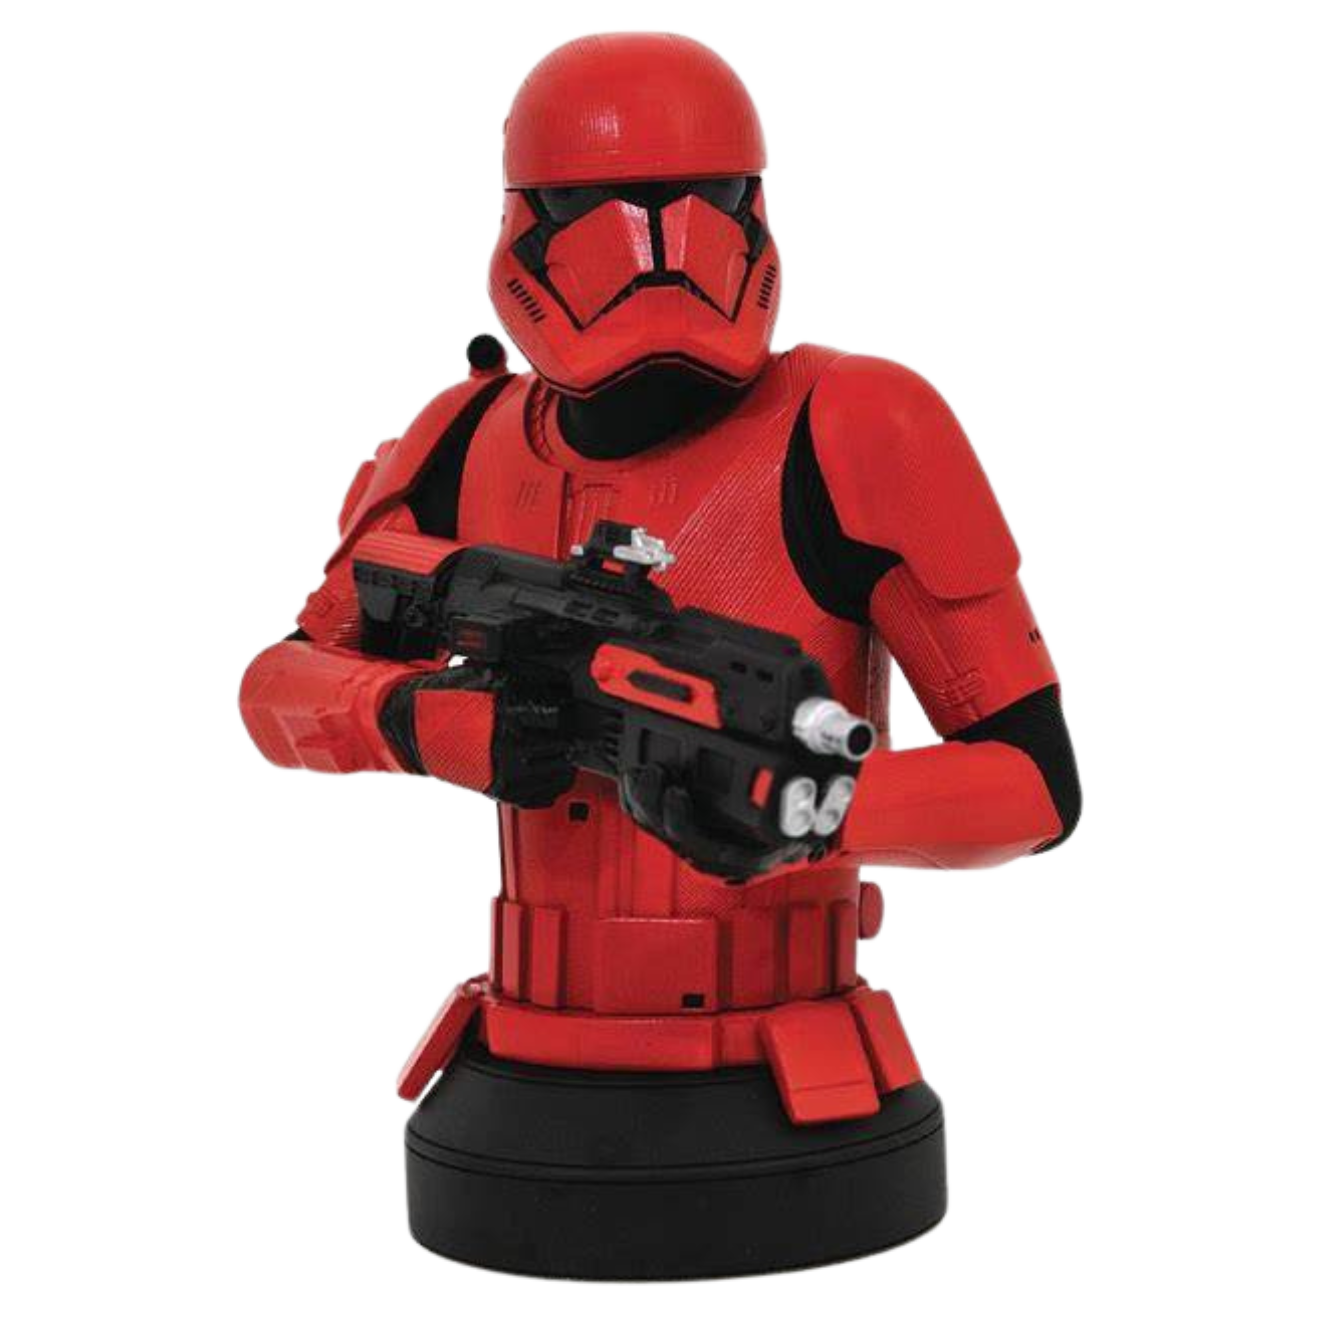 Star Wars Sith Trooper (The Rise of Skywalker) 1/6 Scale Bust